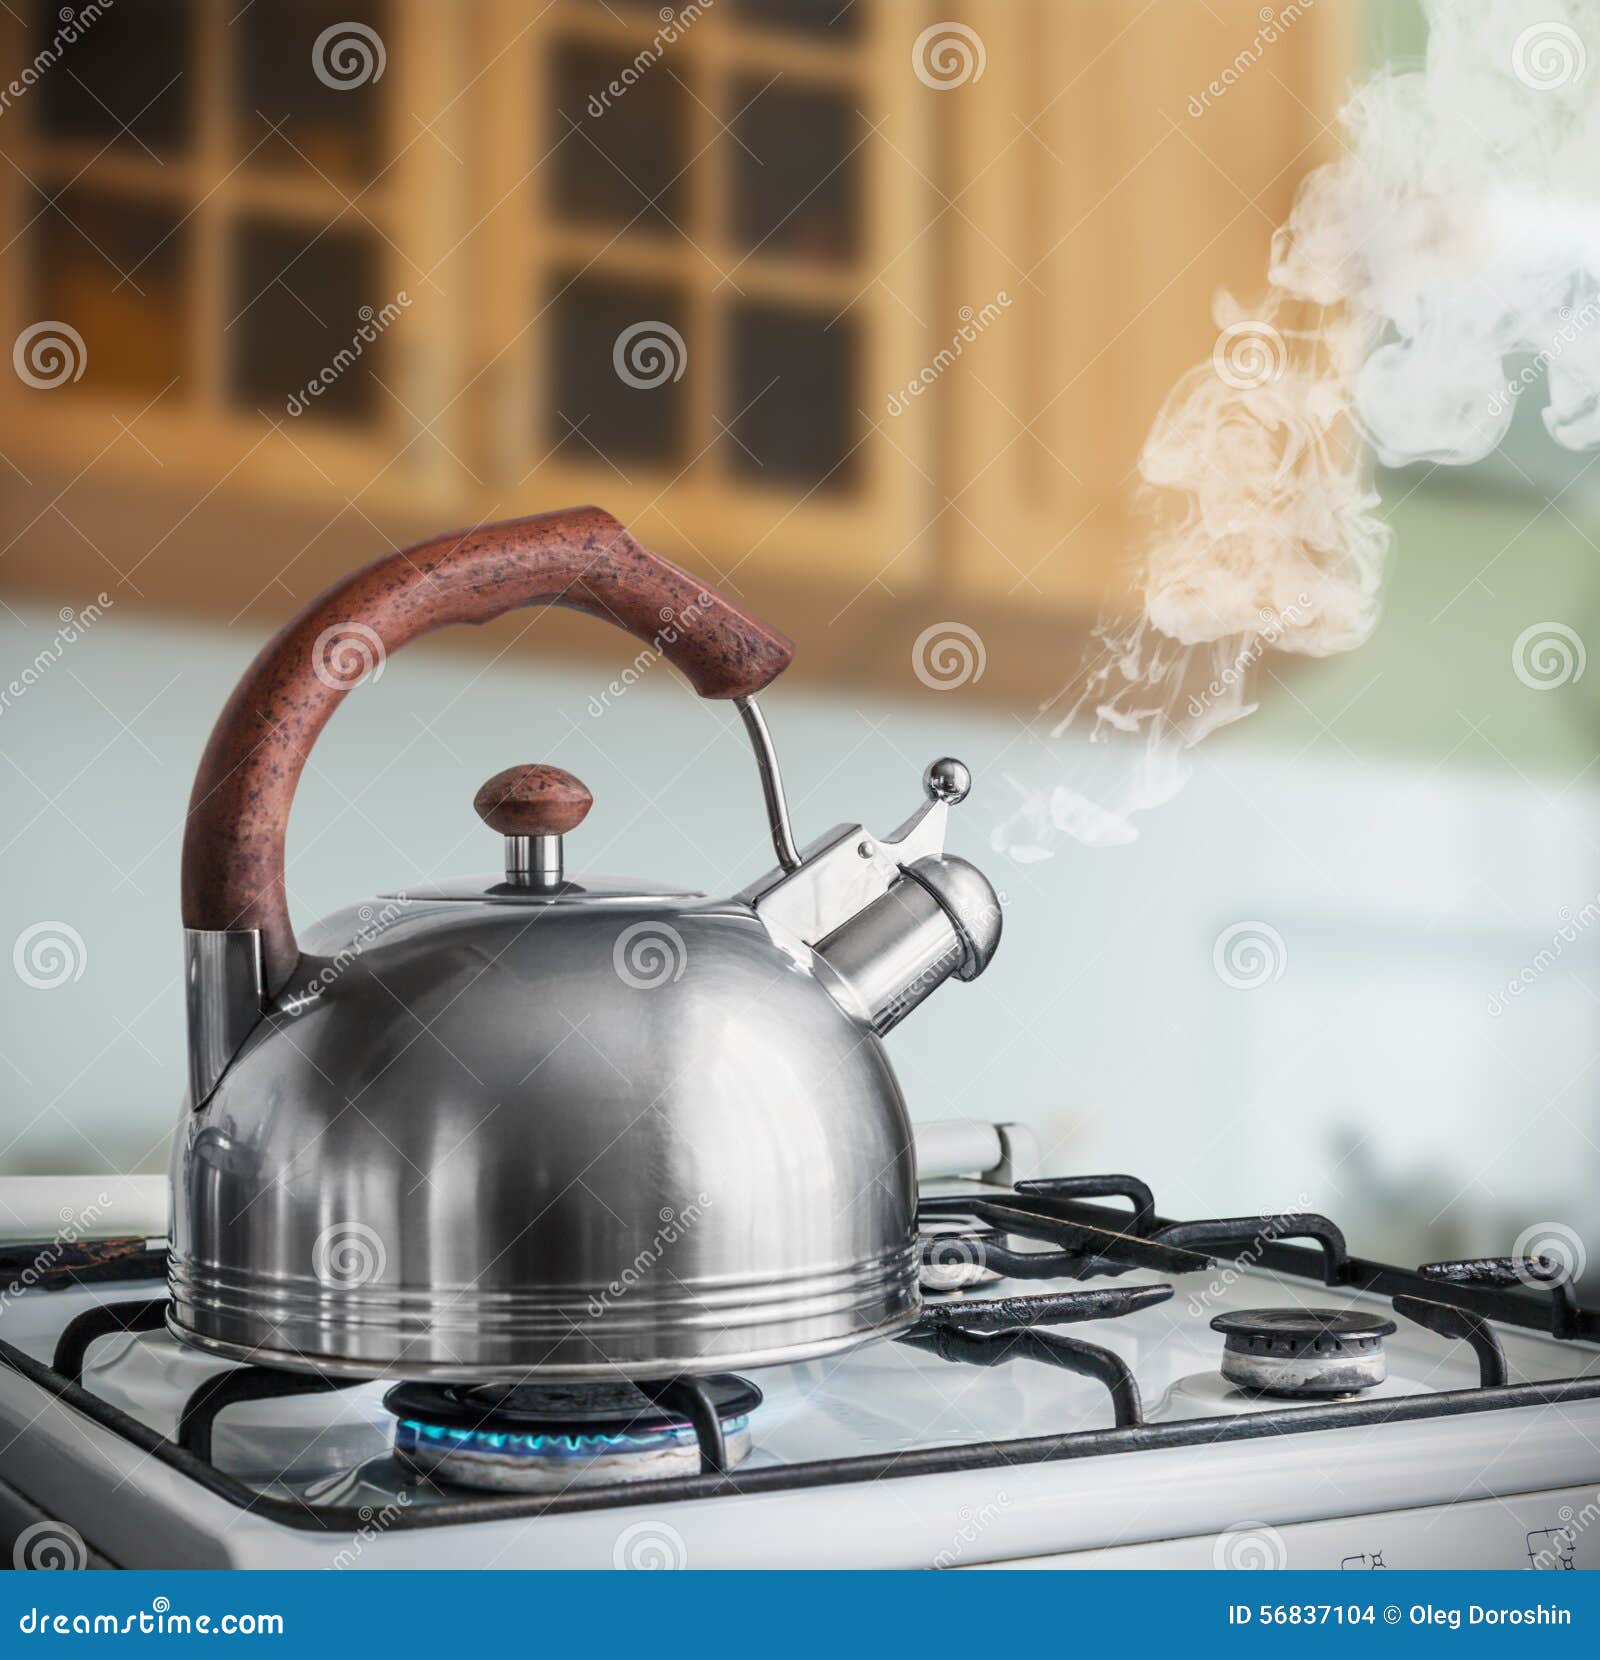 Tea kettle with boiling water on gas stove, Stock image